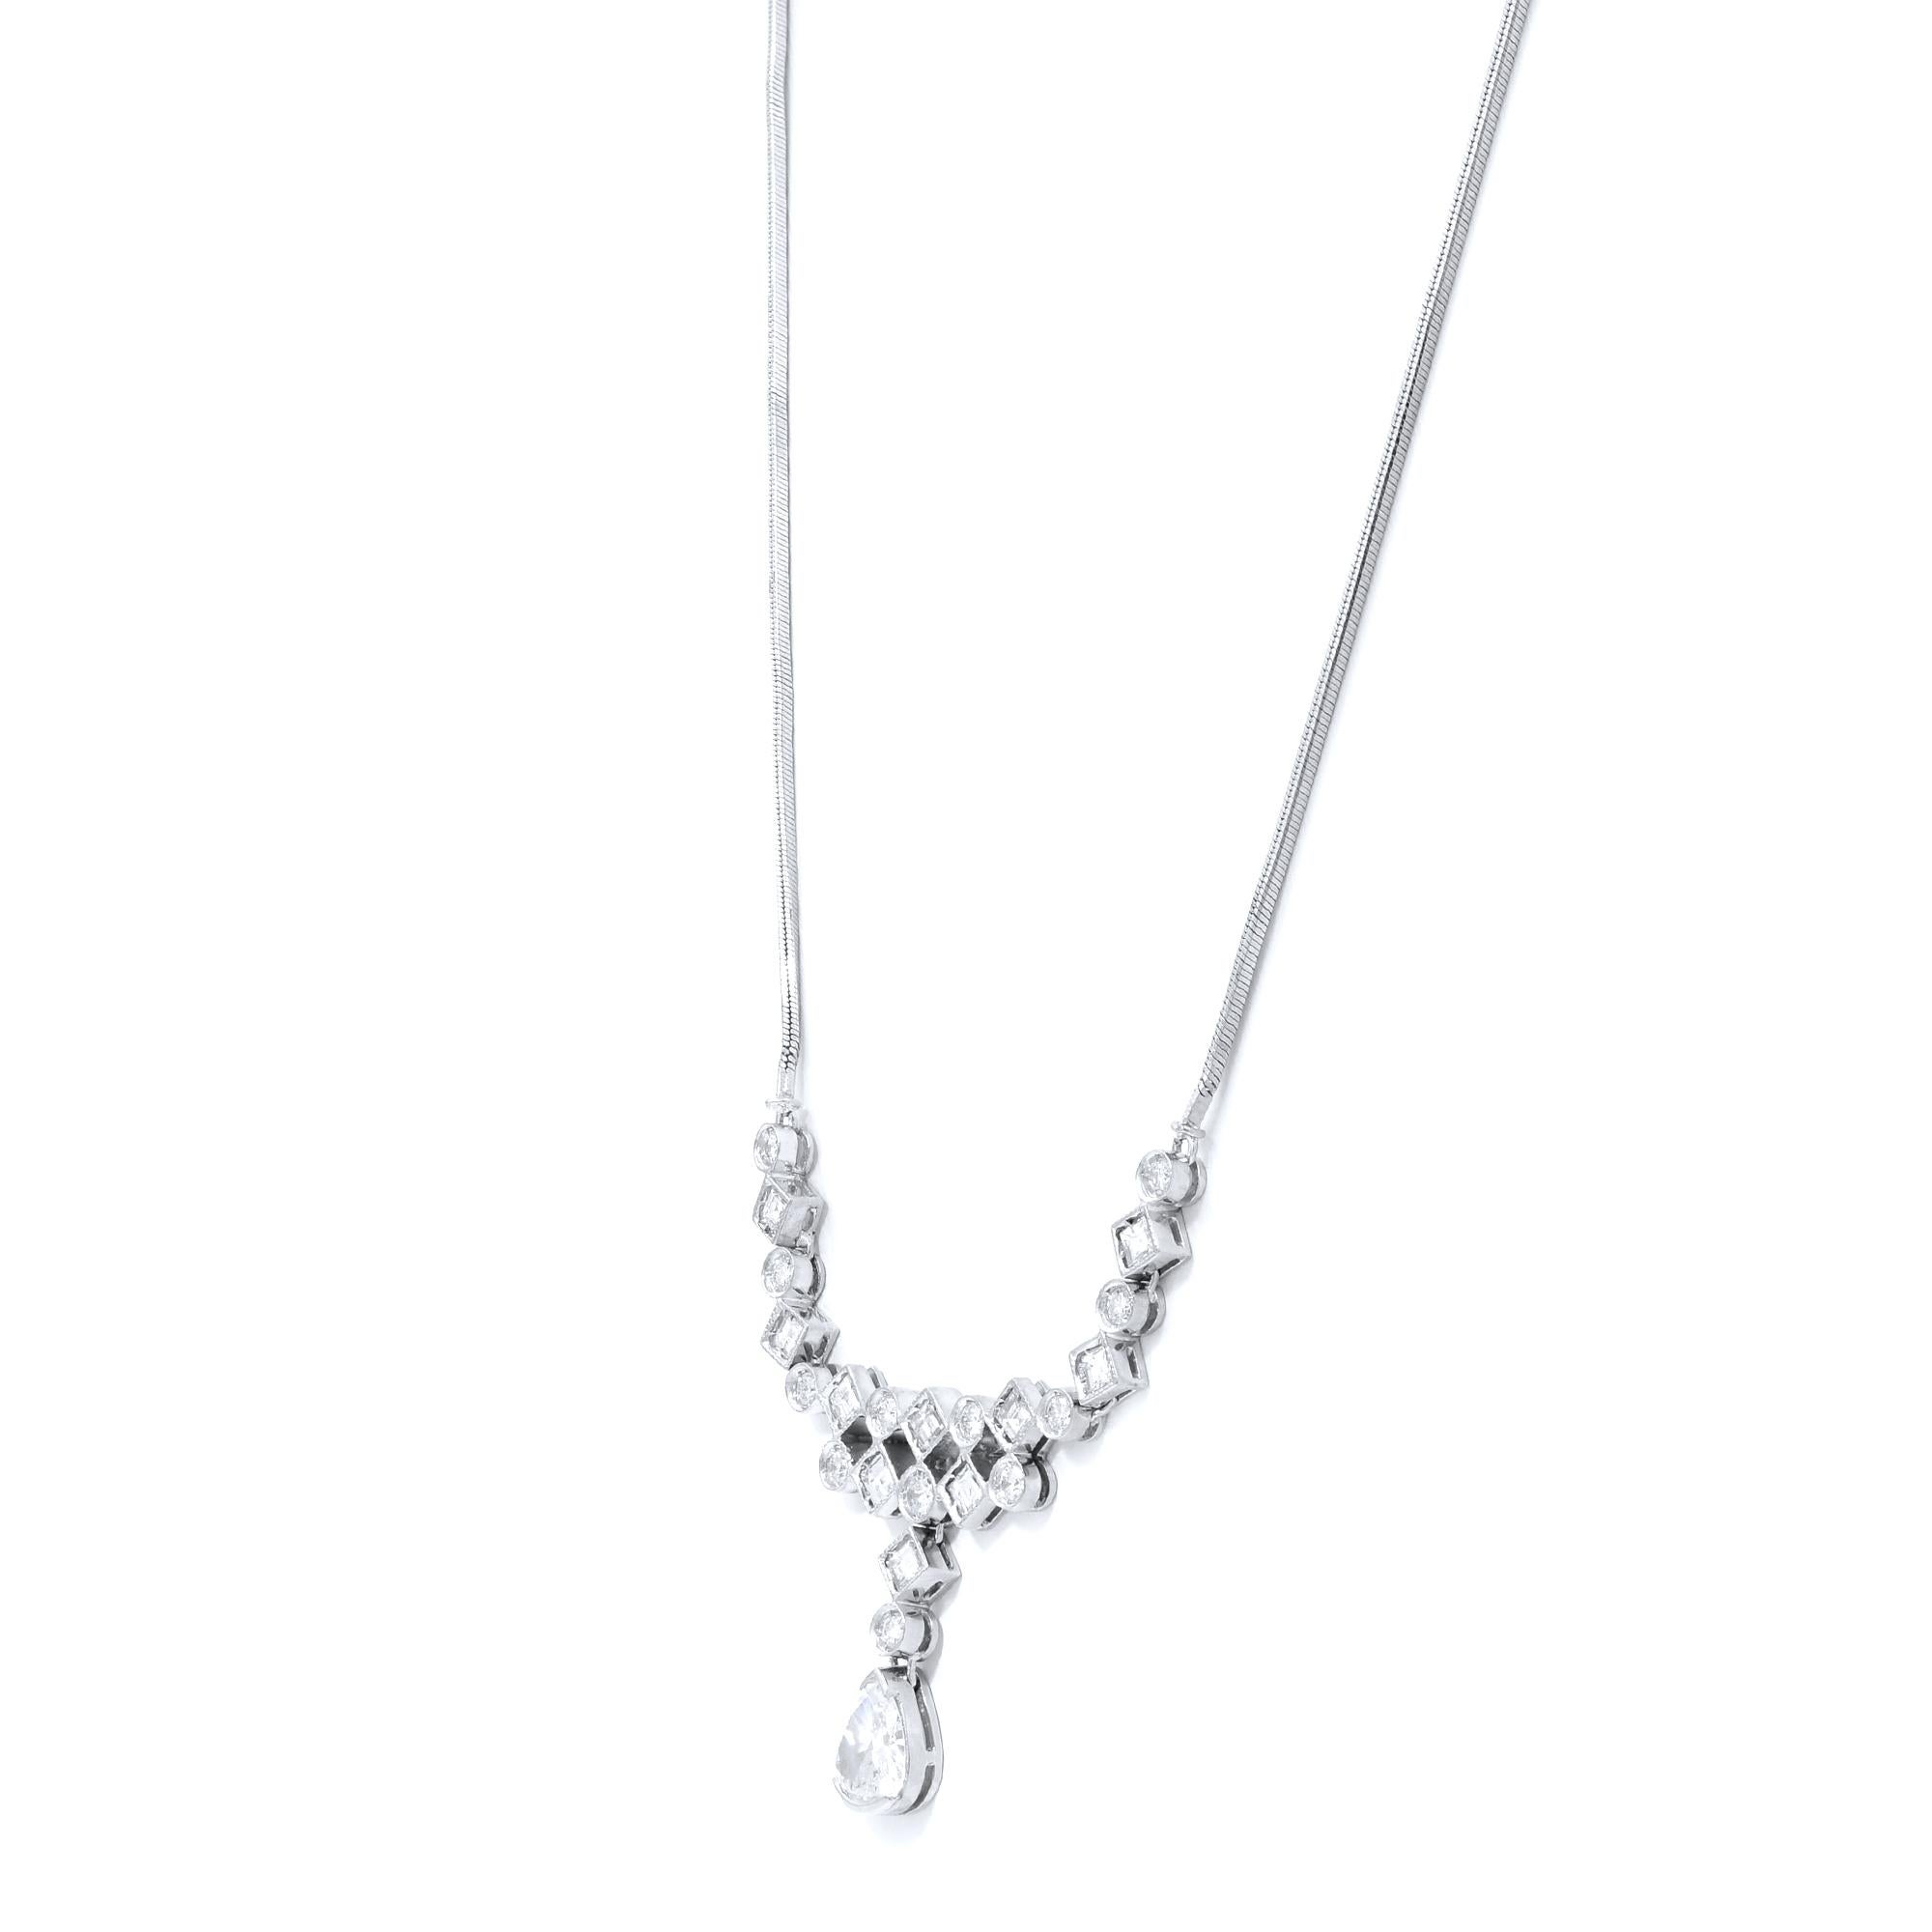 Modern Rachel Koen Pear Round and Carre Shape Diamond Necklace 18K White Gold 2.25Cttw For Sale